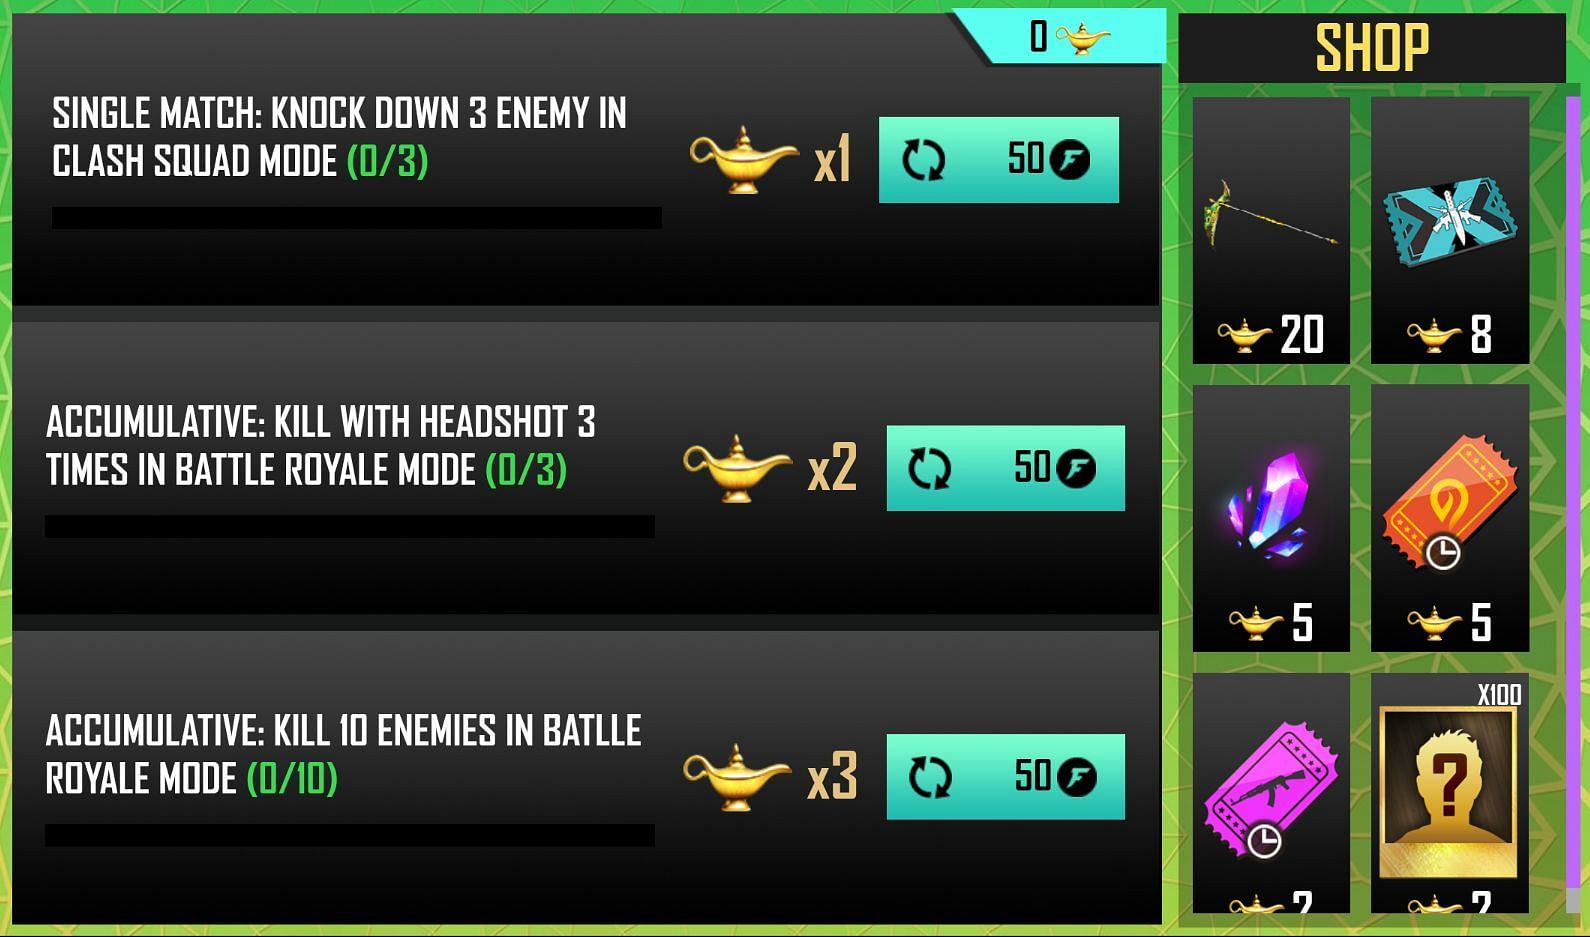 List of missions and rewards